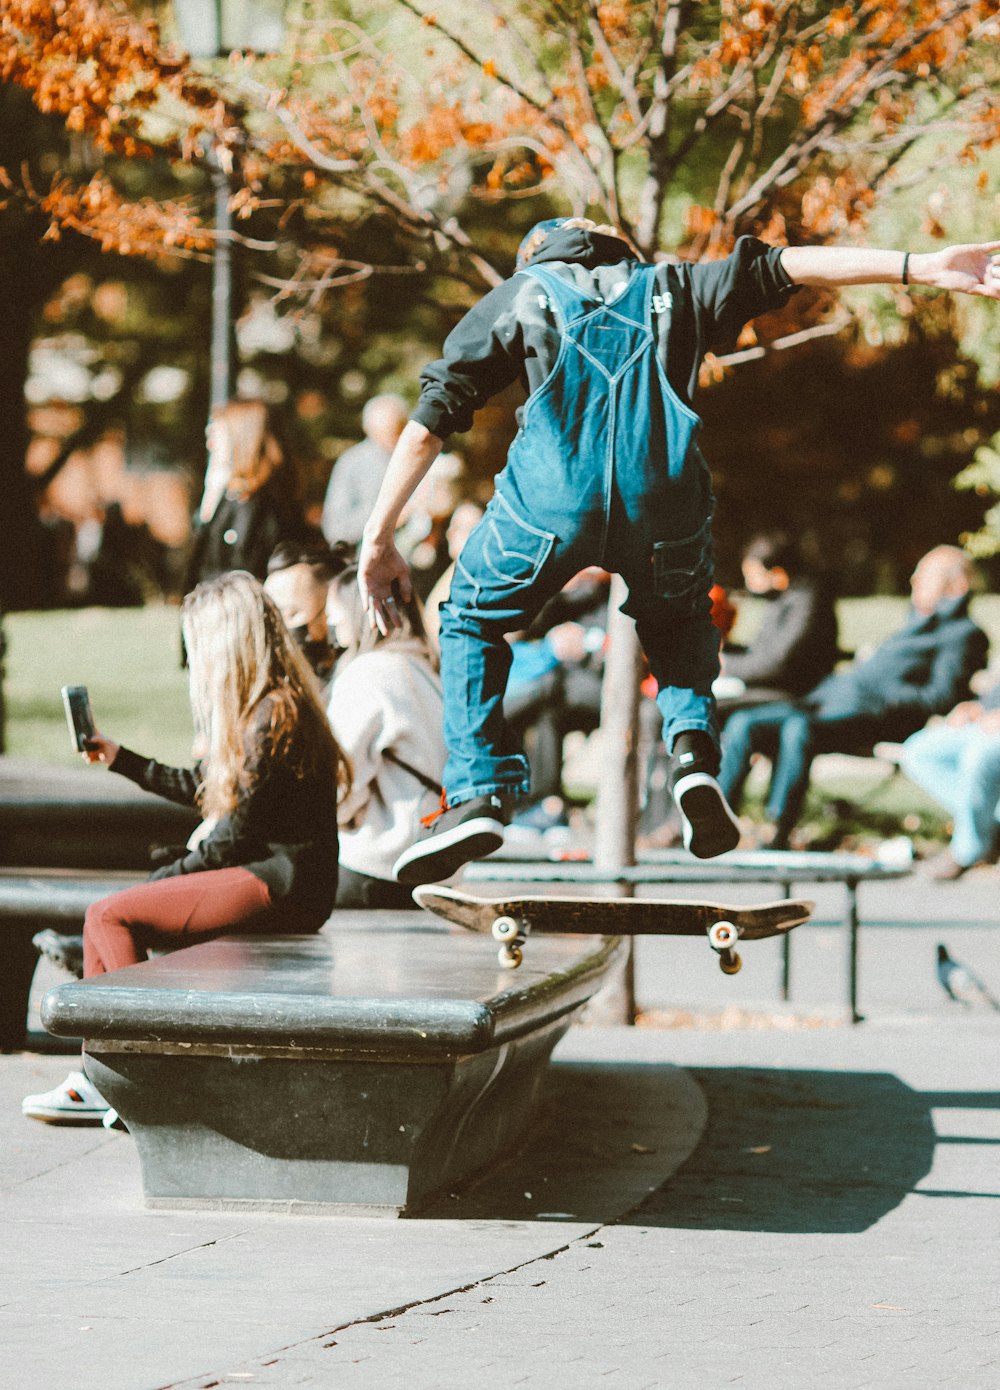 a person jumping a skate board in the air